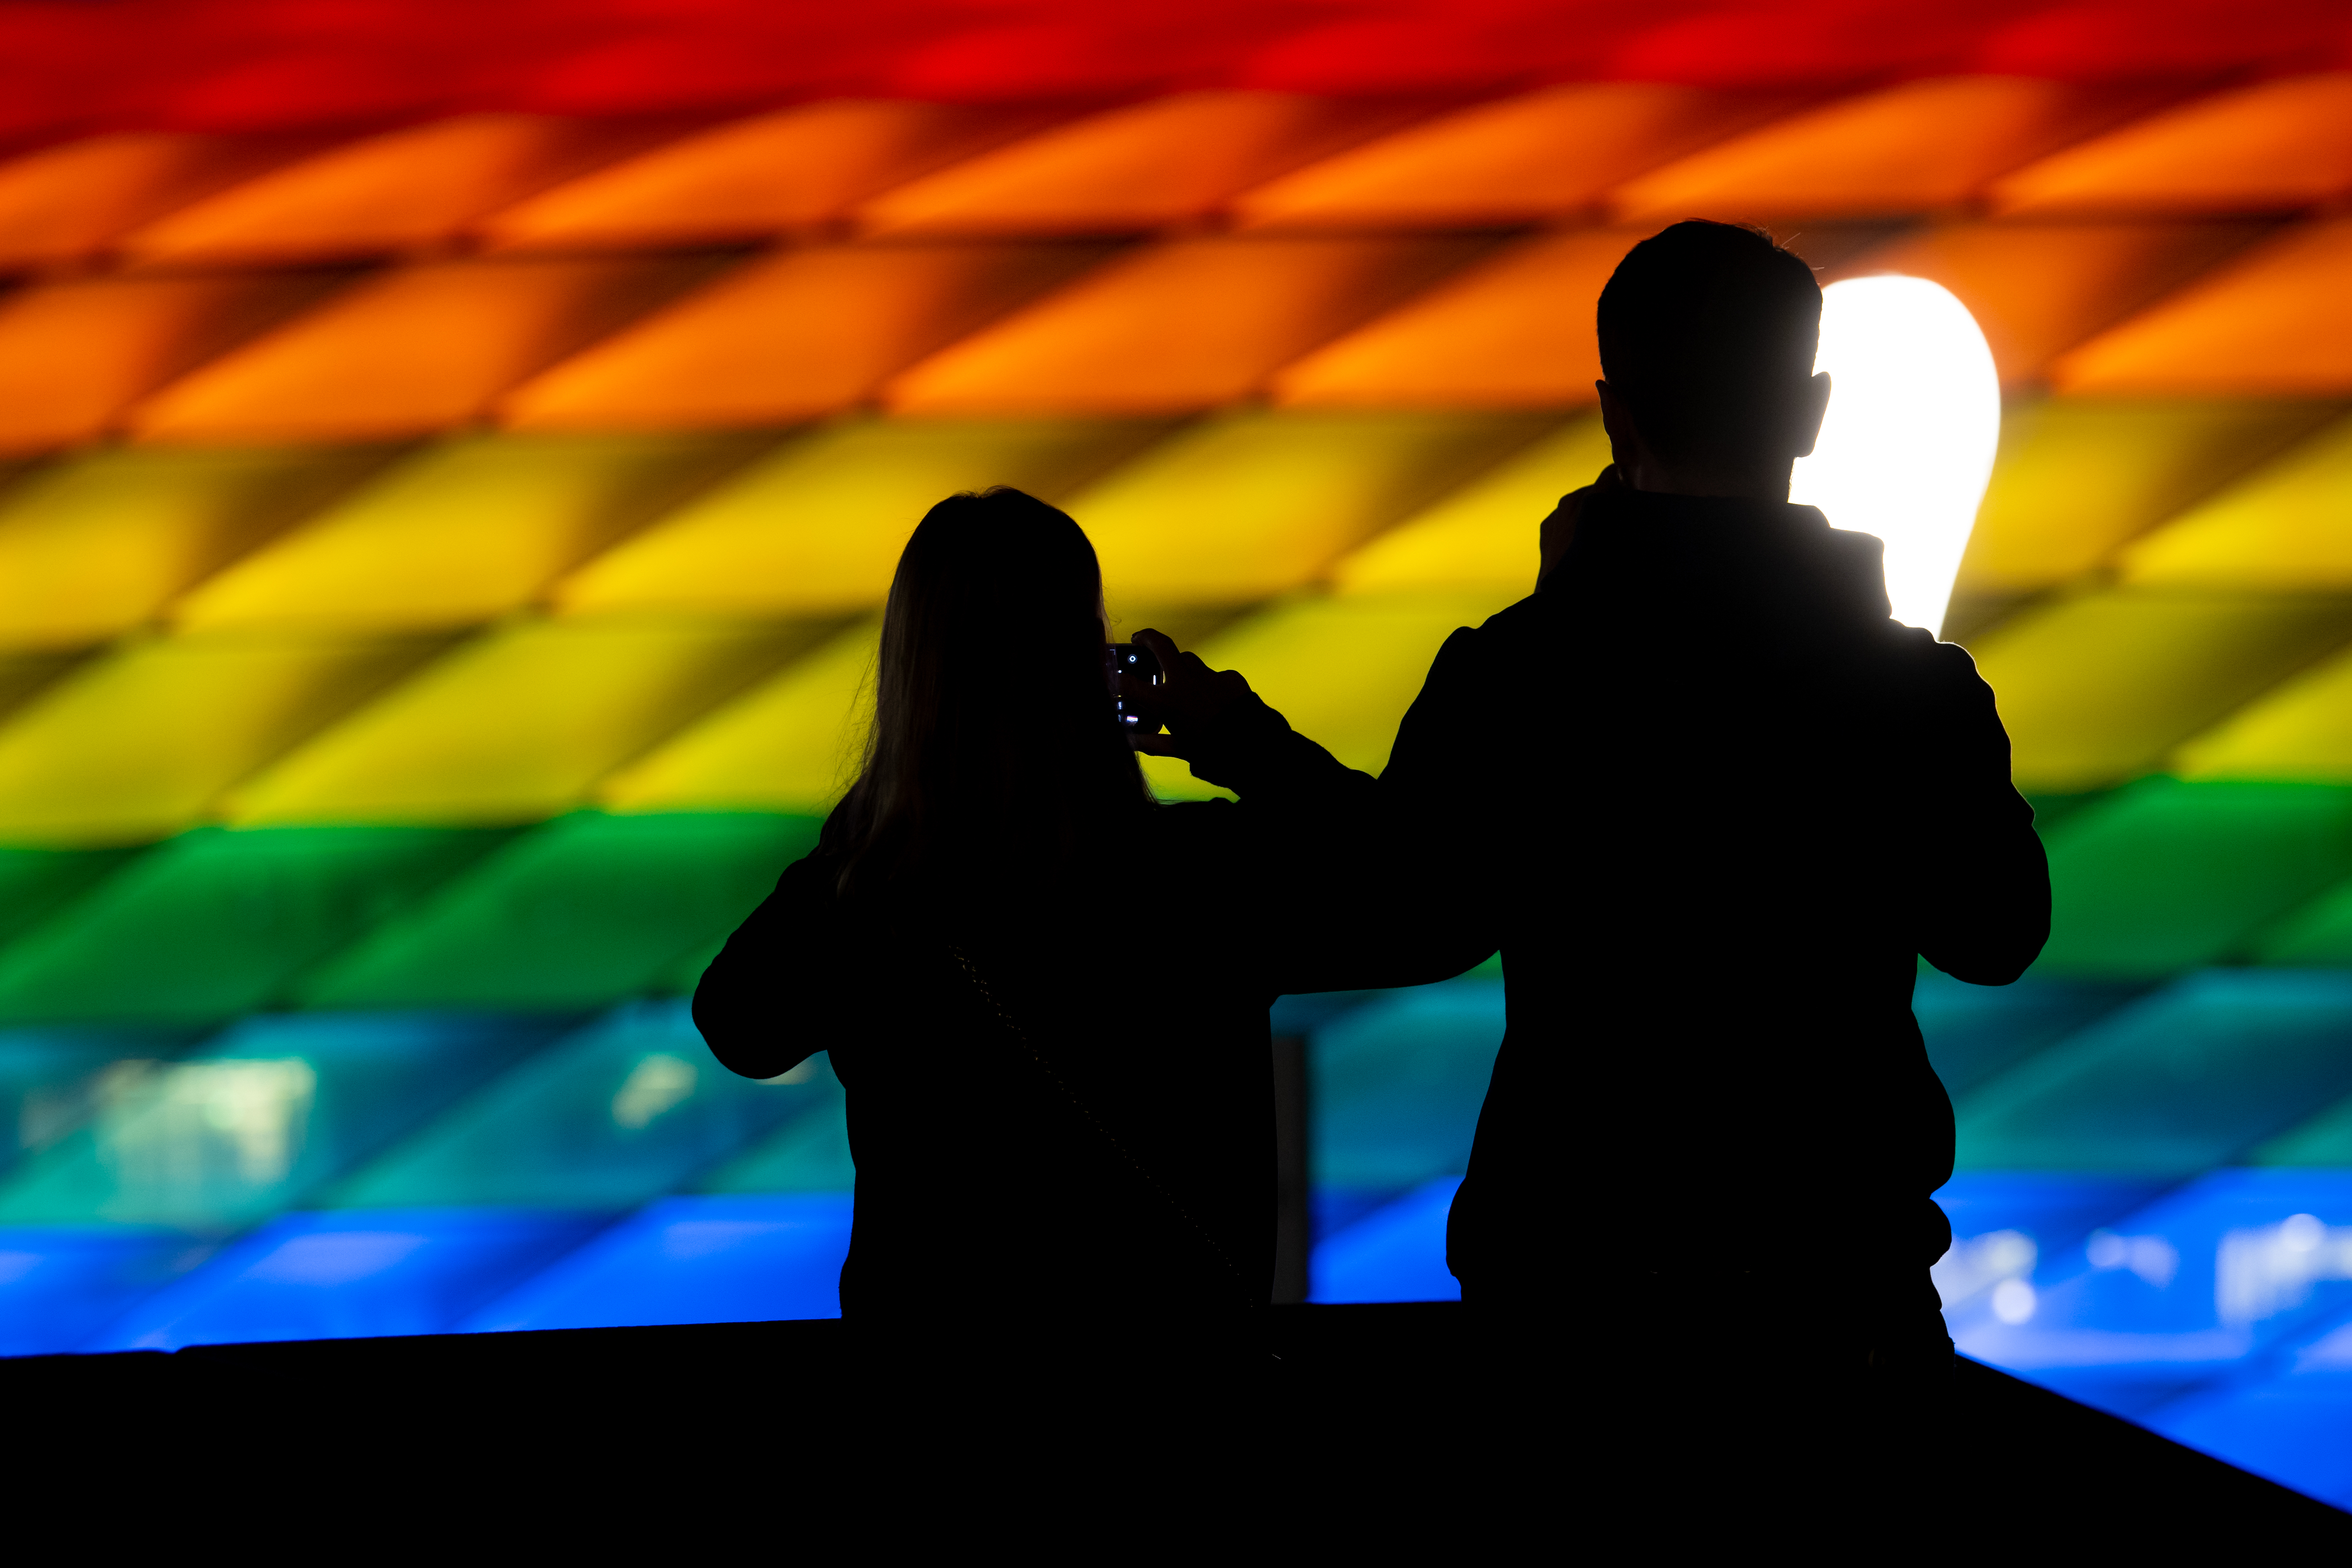 Two silhouettes in front of the rainbow-lit Allianz Arena at nighttime, taking photos